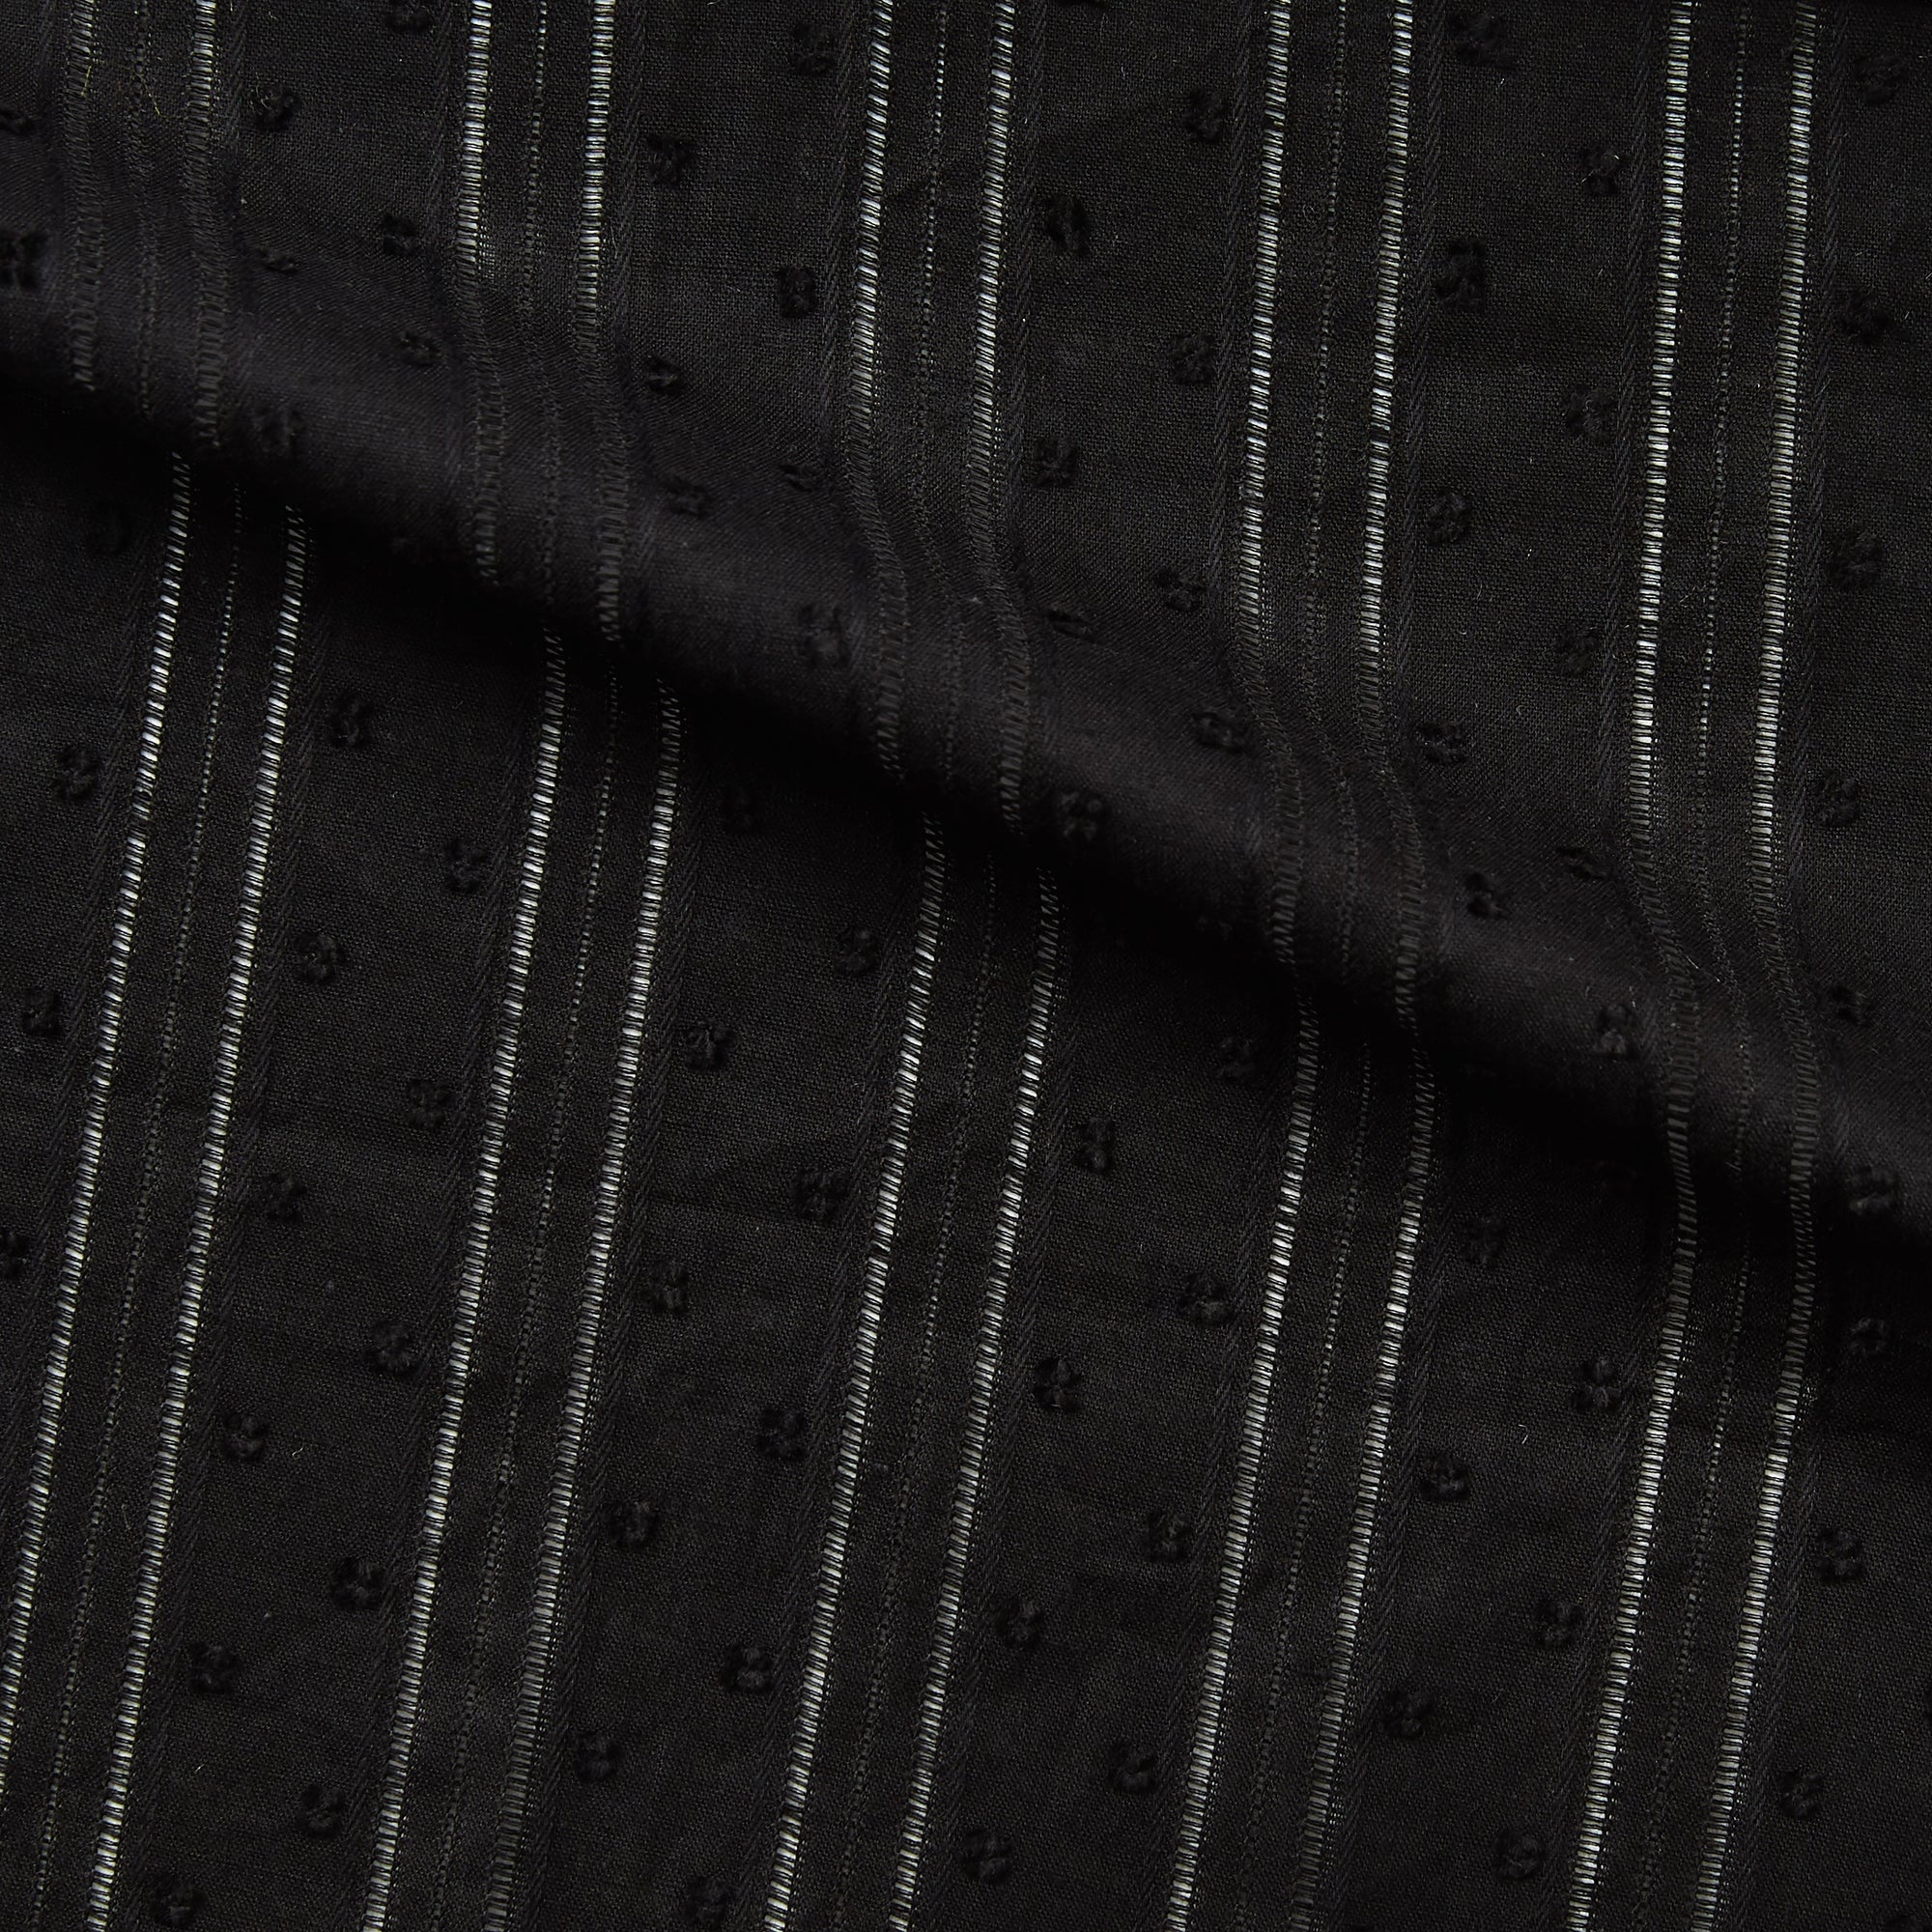 Displaying Hailspot a Black colored base of a breathable soft pure cotton voile with elegant drop stitch stripes and tuft spot textured face